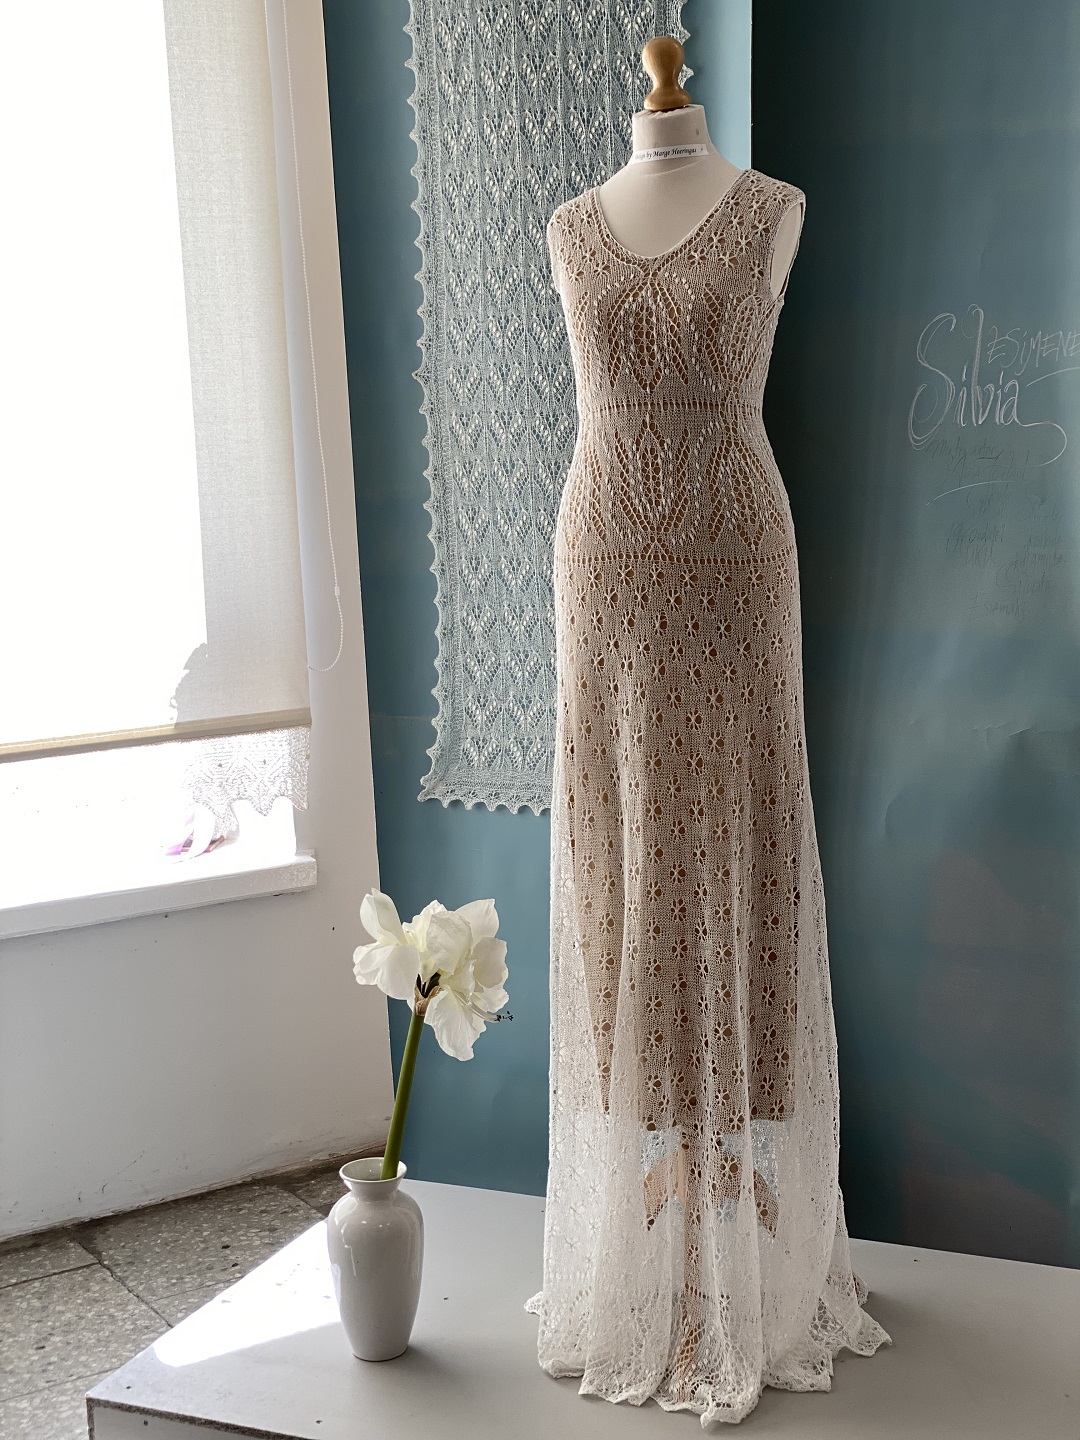 Haapsalu Lace Center - Hand knit lace wedding gowns